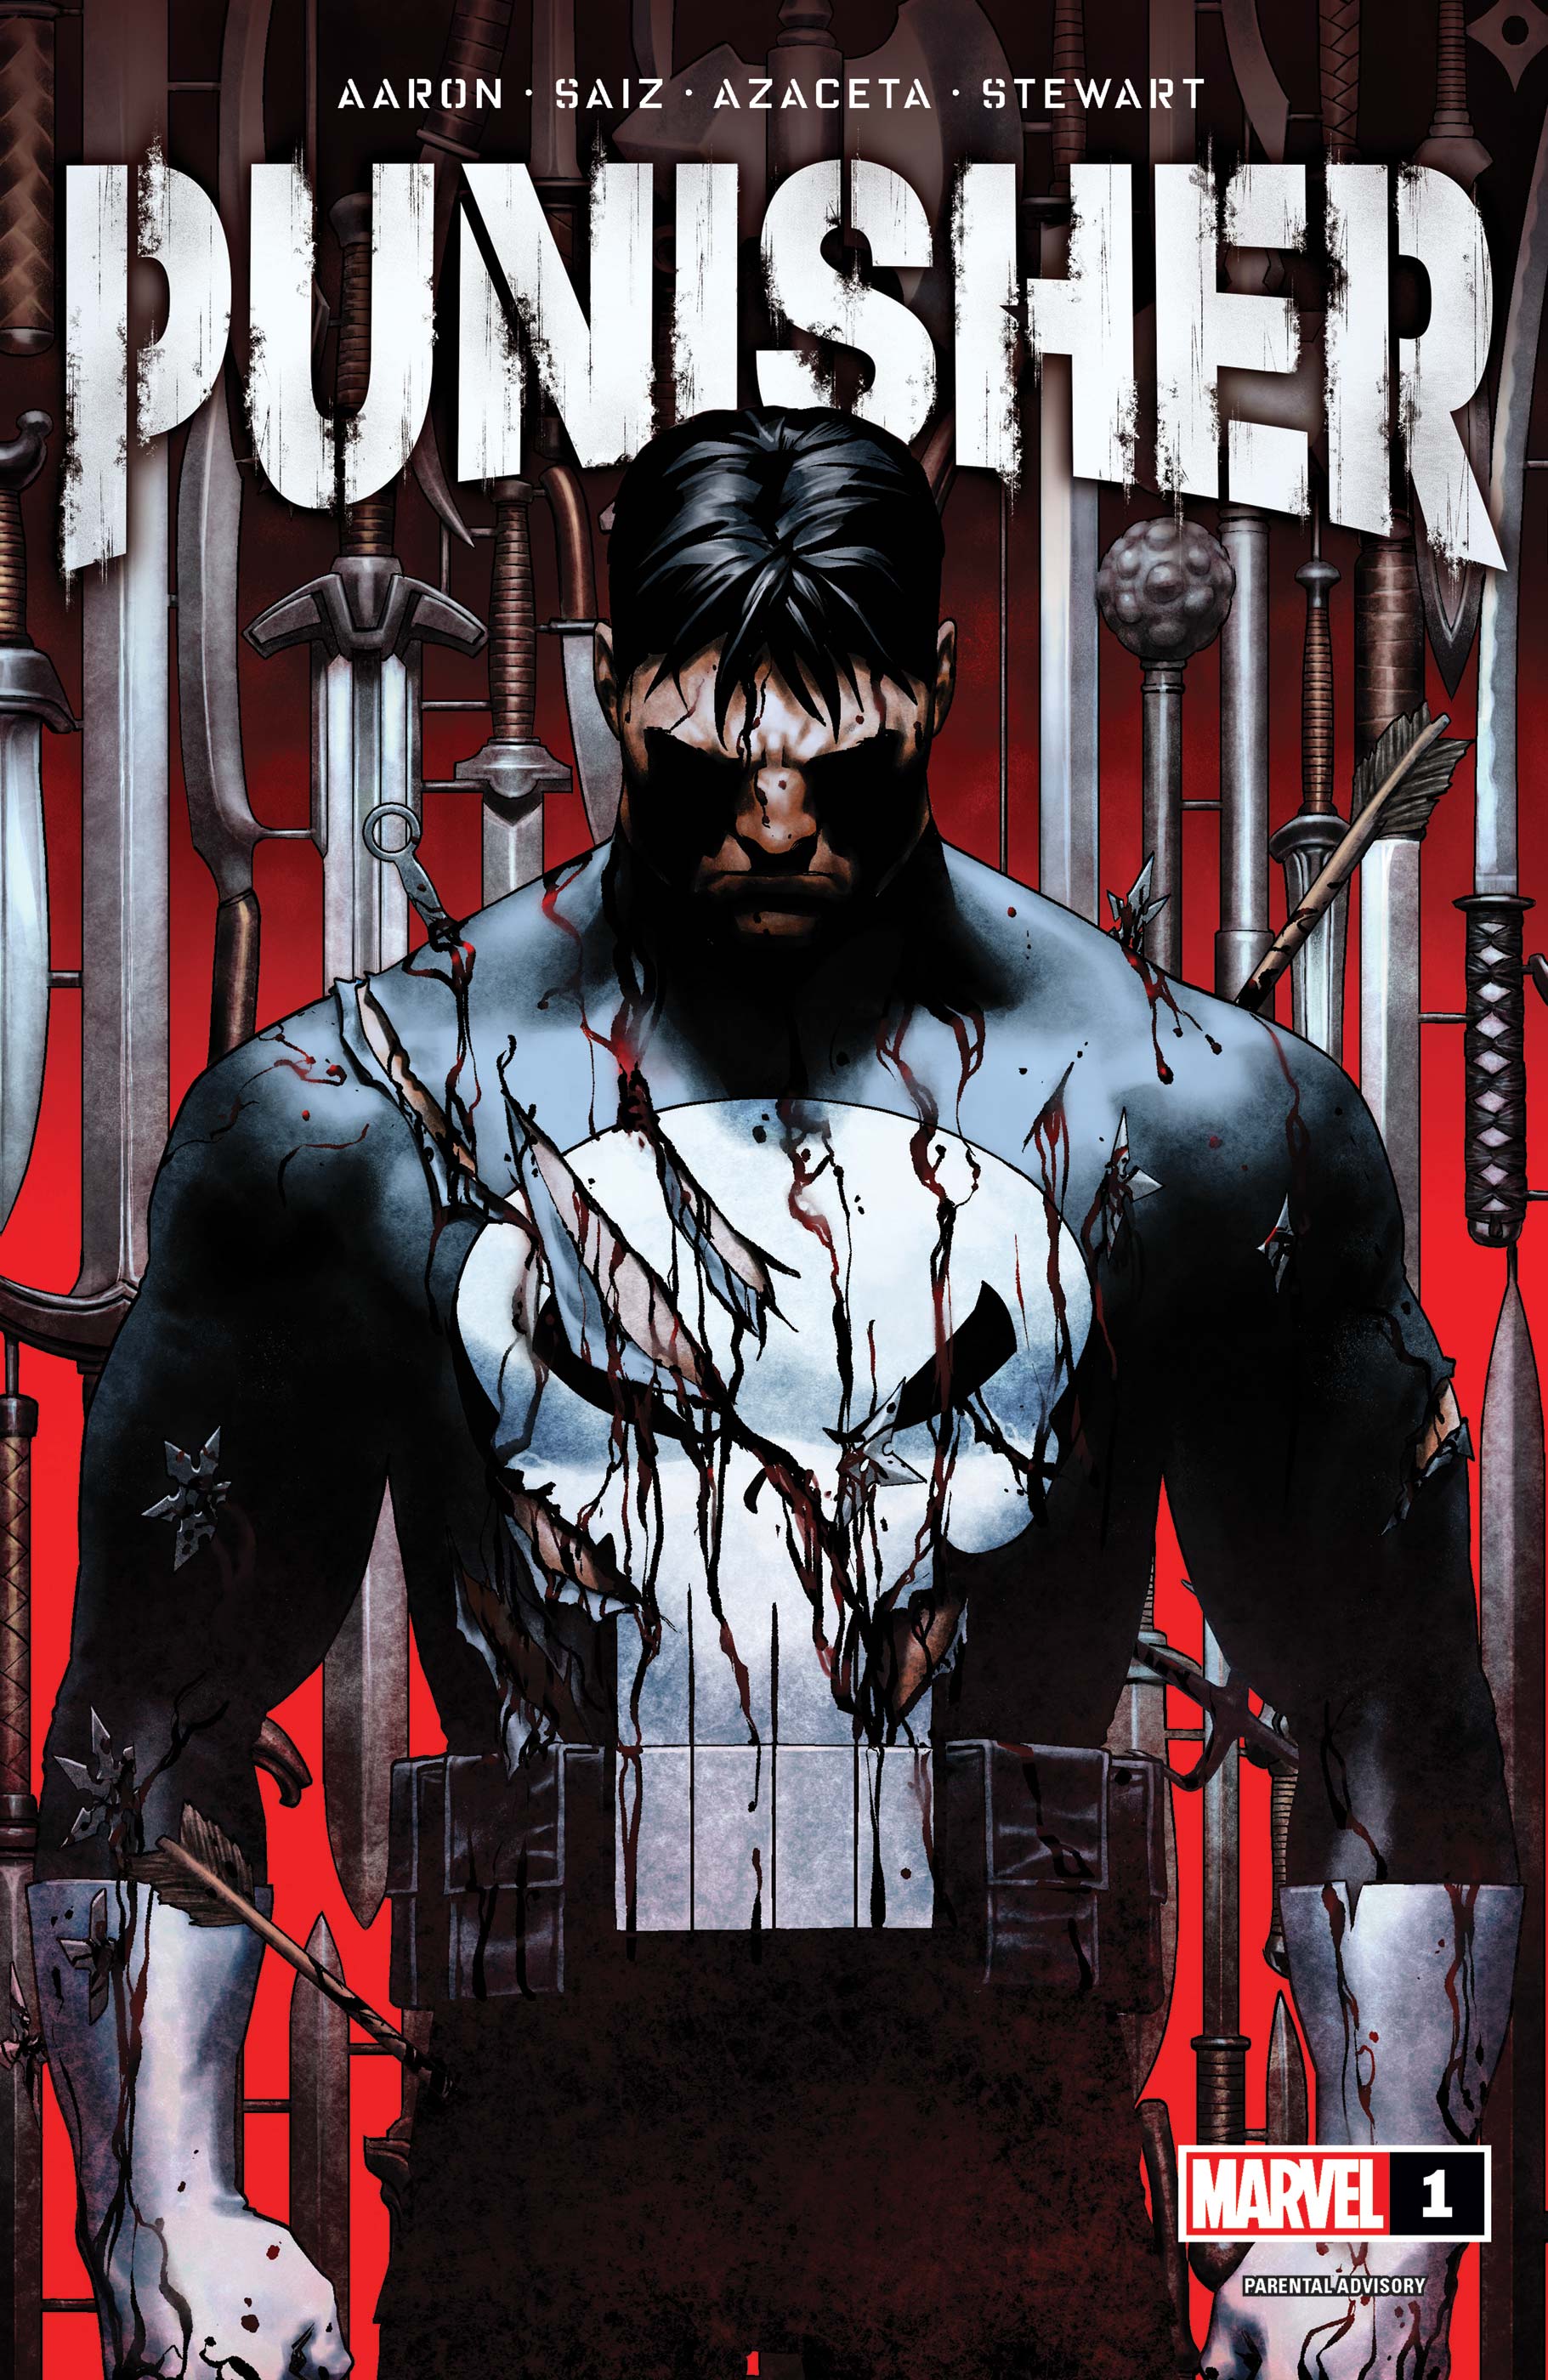 Punisher the The Punisher